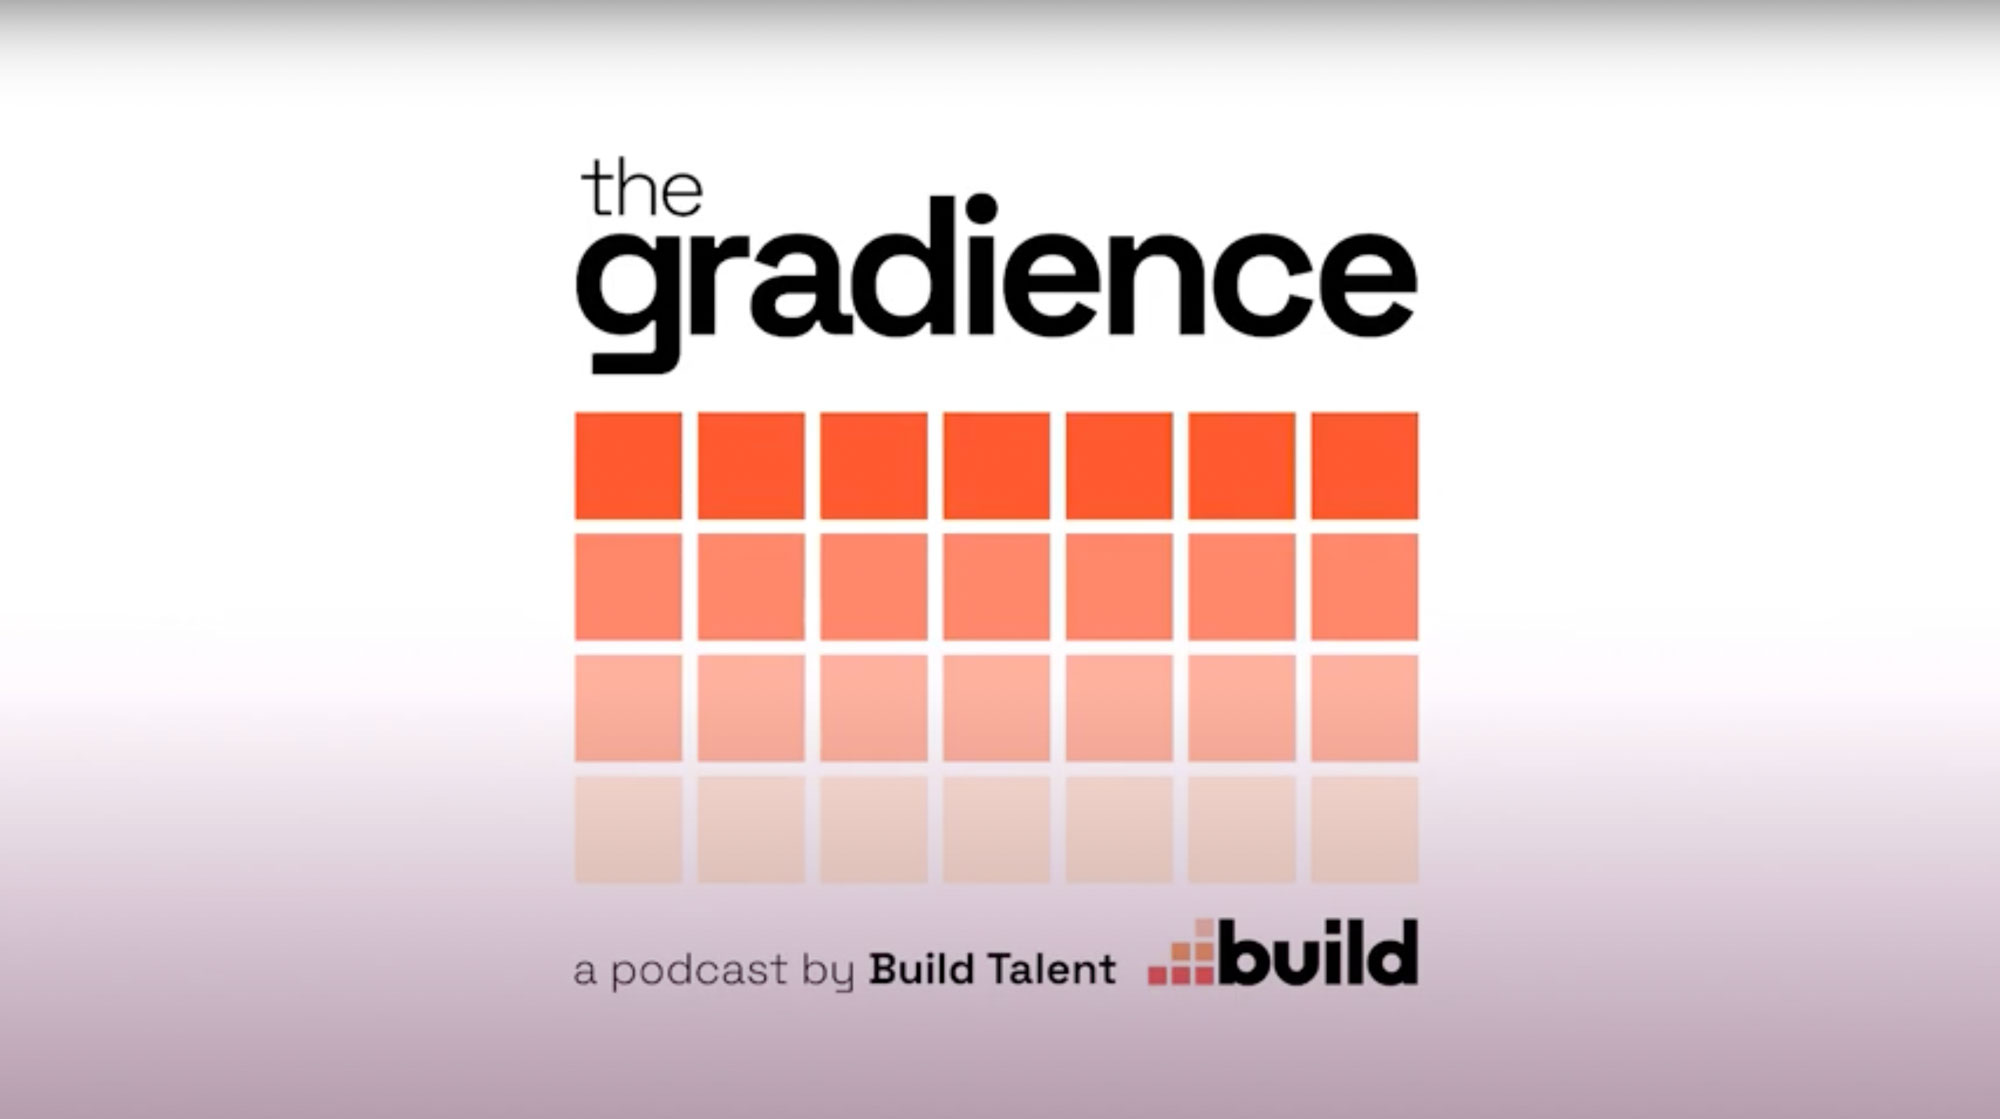 The Gradience Podcast